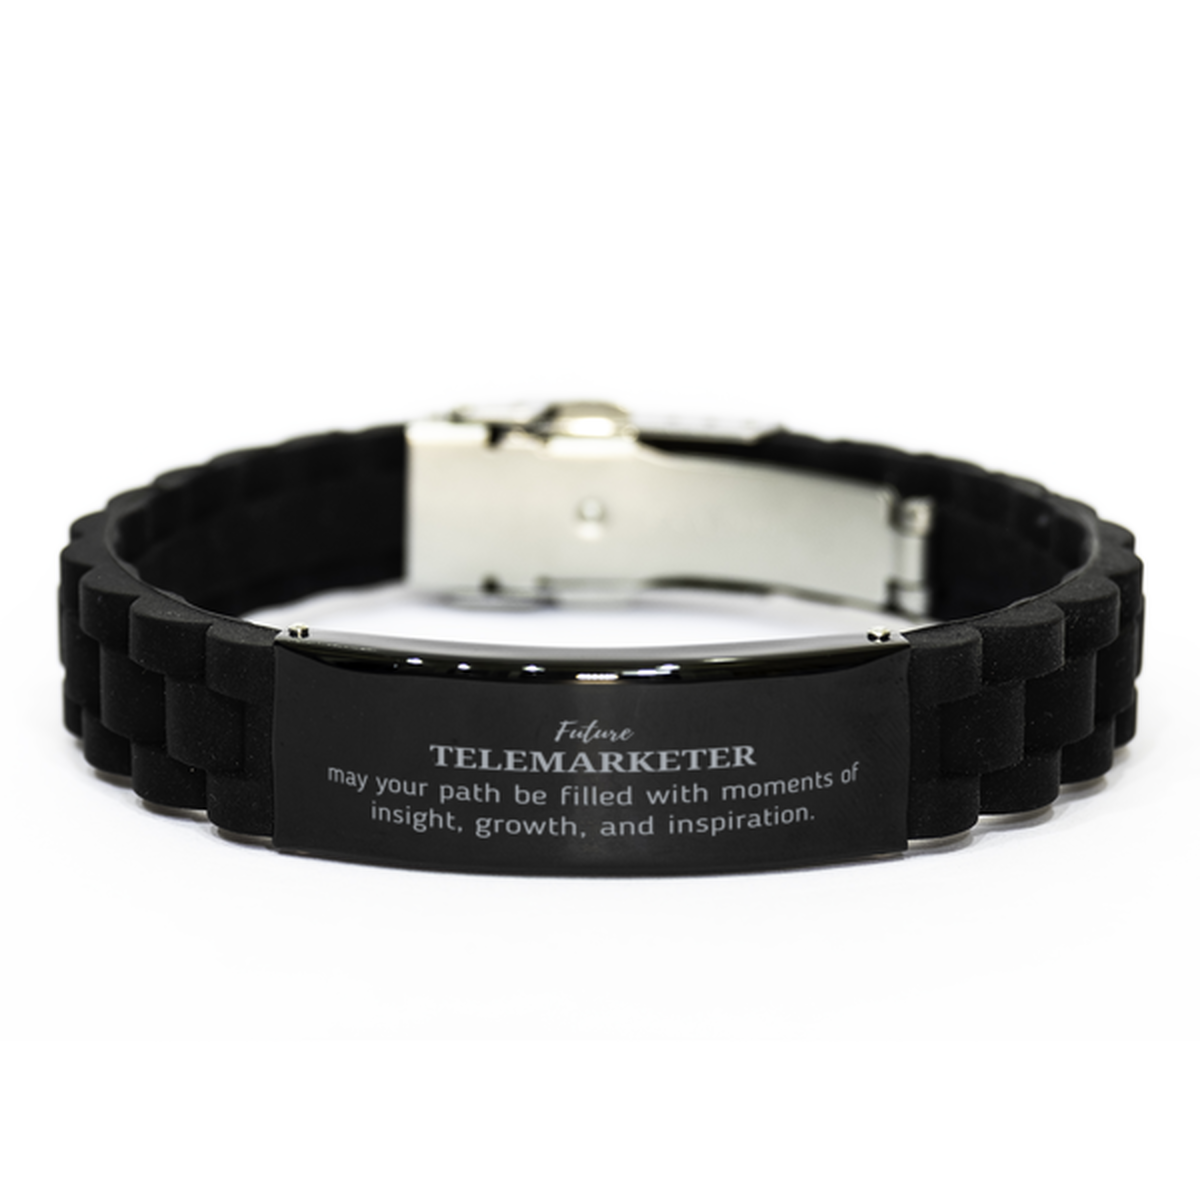 Future Telemarketer Gifts, May your path be filled with moments of insight, Graduation Gifts for New Telemarketer, Christmas Unique Black Glidelock Clasp Bracelet For Men, Women, Friends